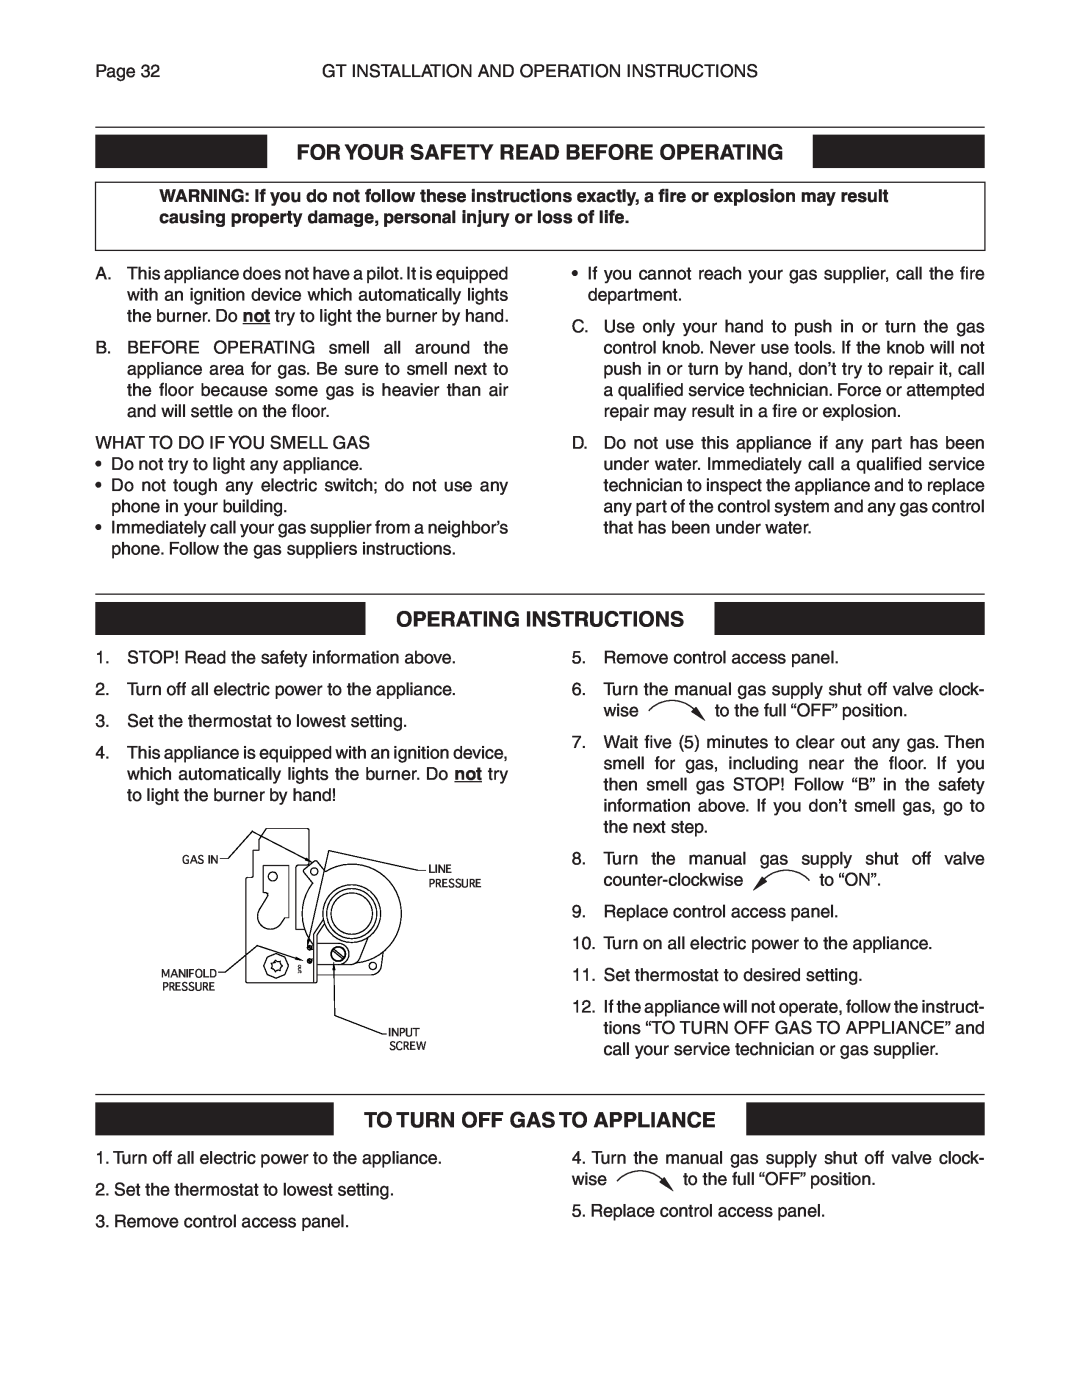 Smith Cast Iron Boilers GT Series manual For Your Safety Read Before Operating, Operating Instructions 